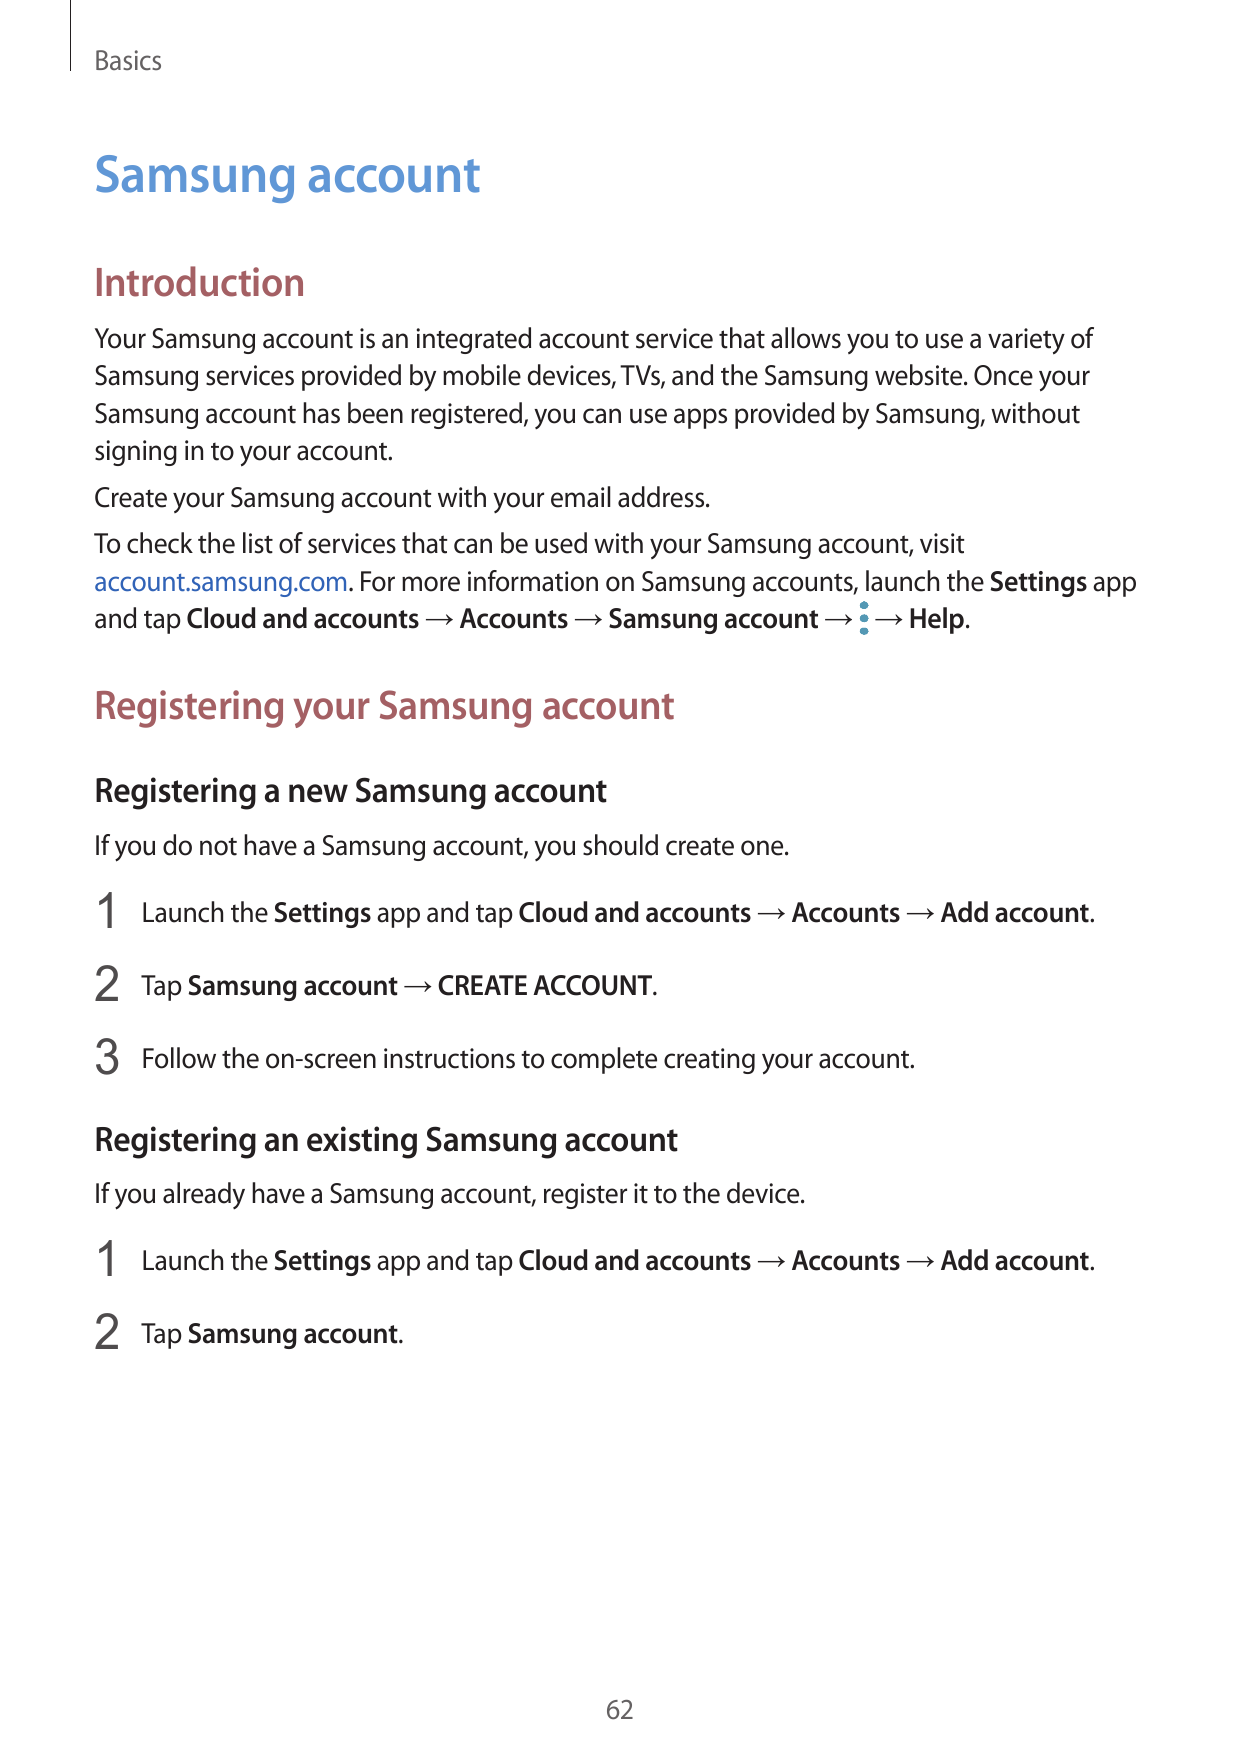 BasicsSamsung accountIntroductionYour Samsung account is an integrated account service that allows you to use a variety ofSamsun